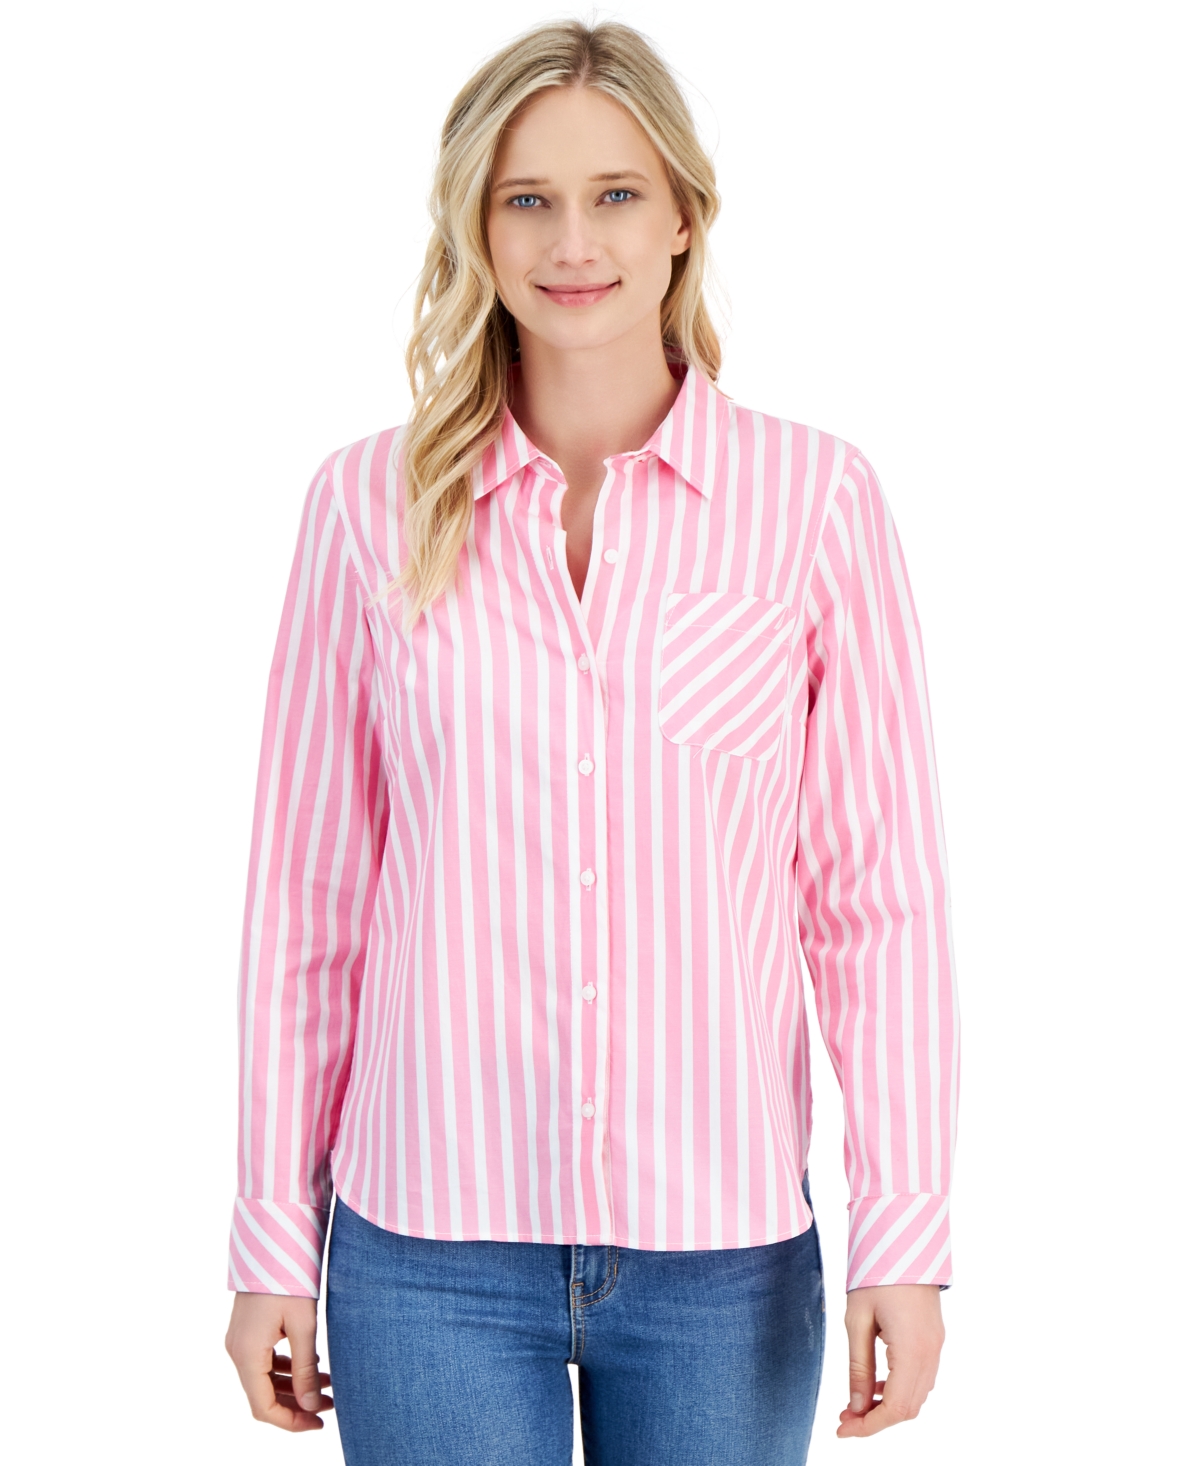 Women's Striped Seaport Roll-Tab-Sleeves Button-Down Shirt - Lt/paspink